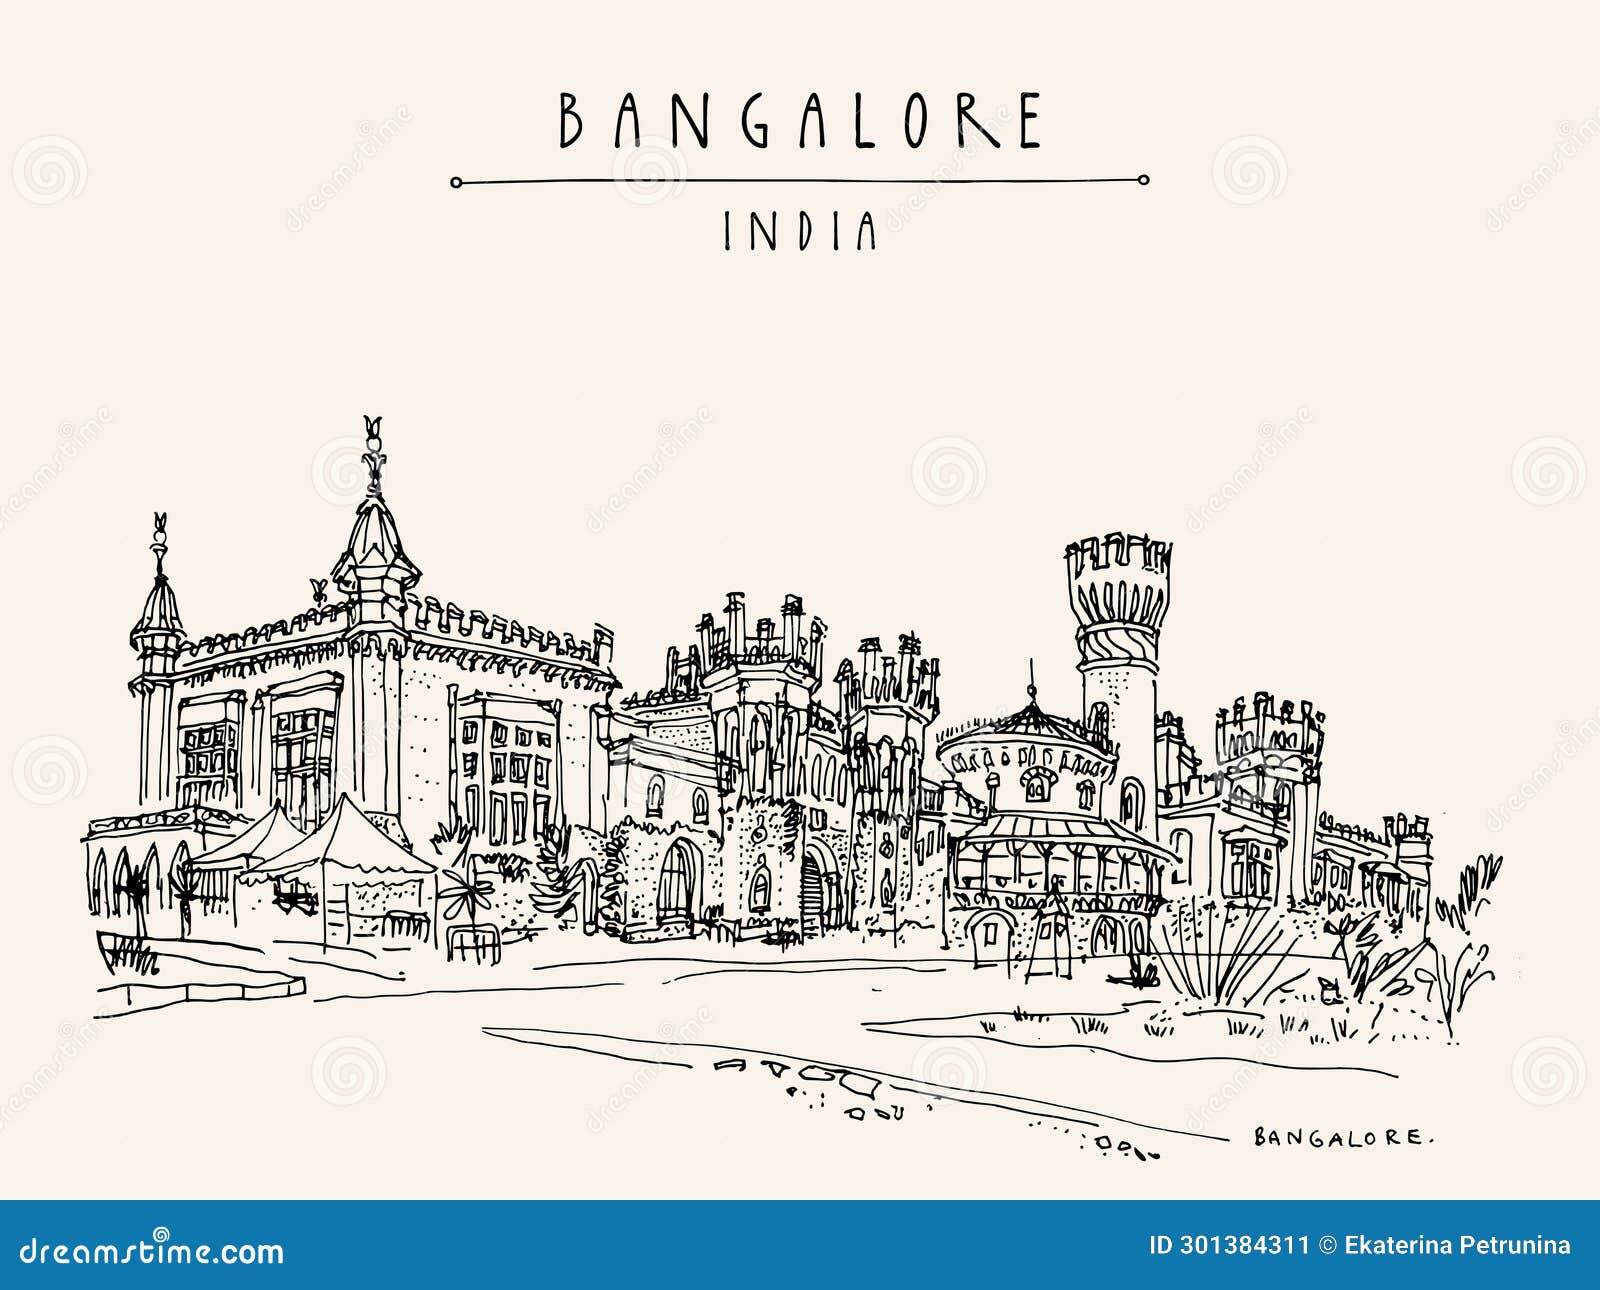 Bangalore Doodle: Over 38 Royalty-Free Licensable Stock Illustrations &  Drawings | Shutterstock